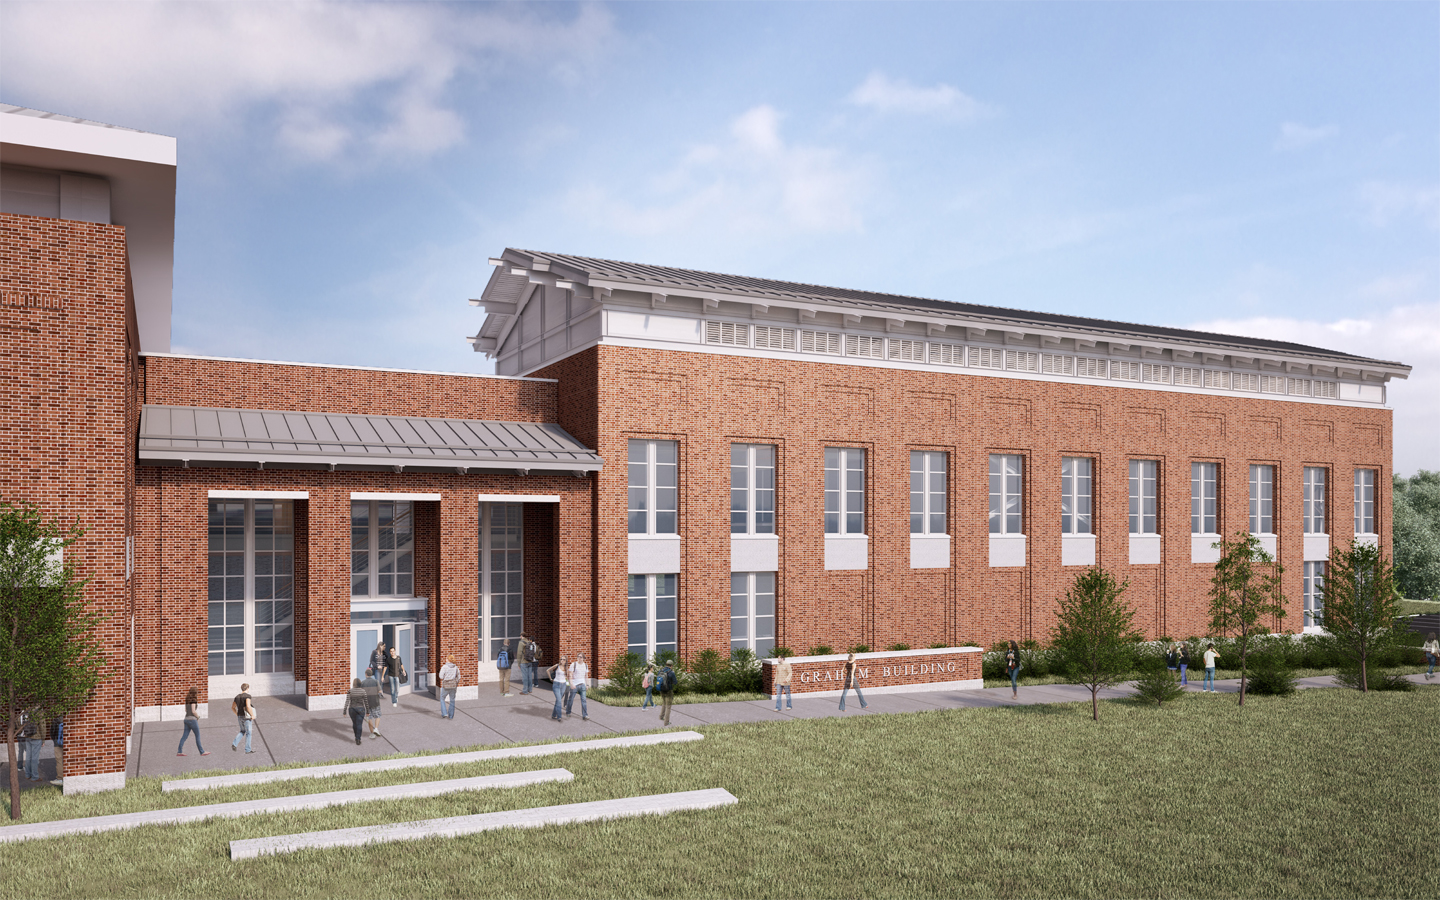 A conceptual image of the Graham Building at Bucknell University